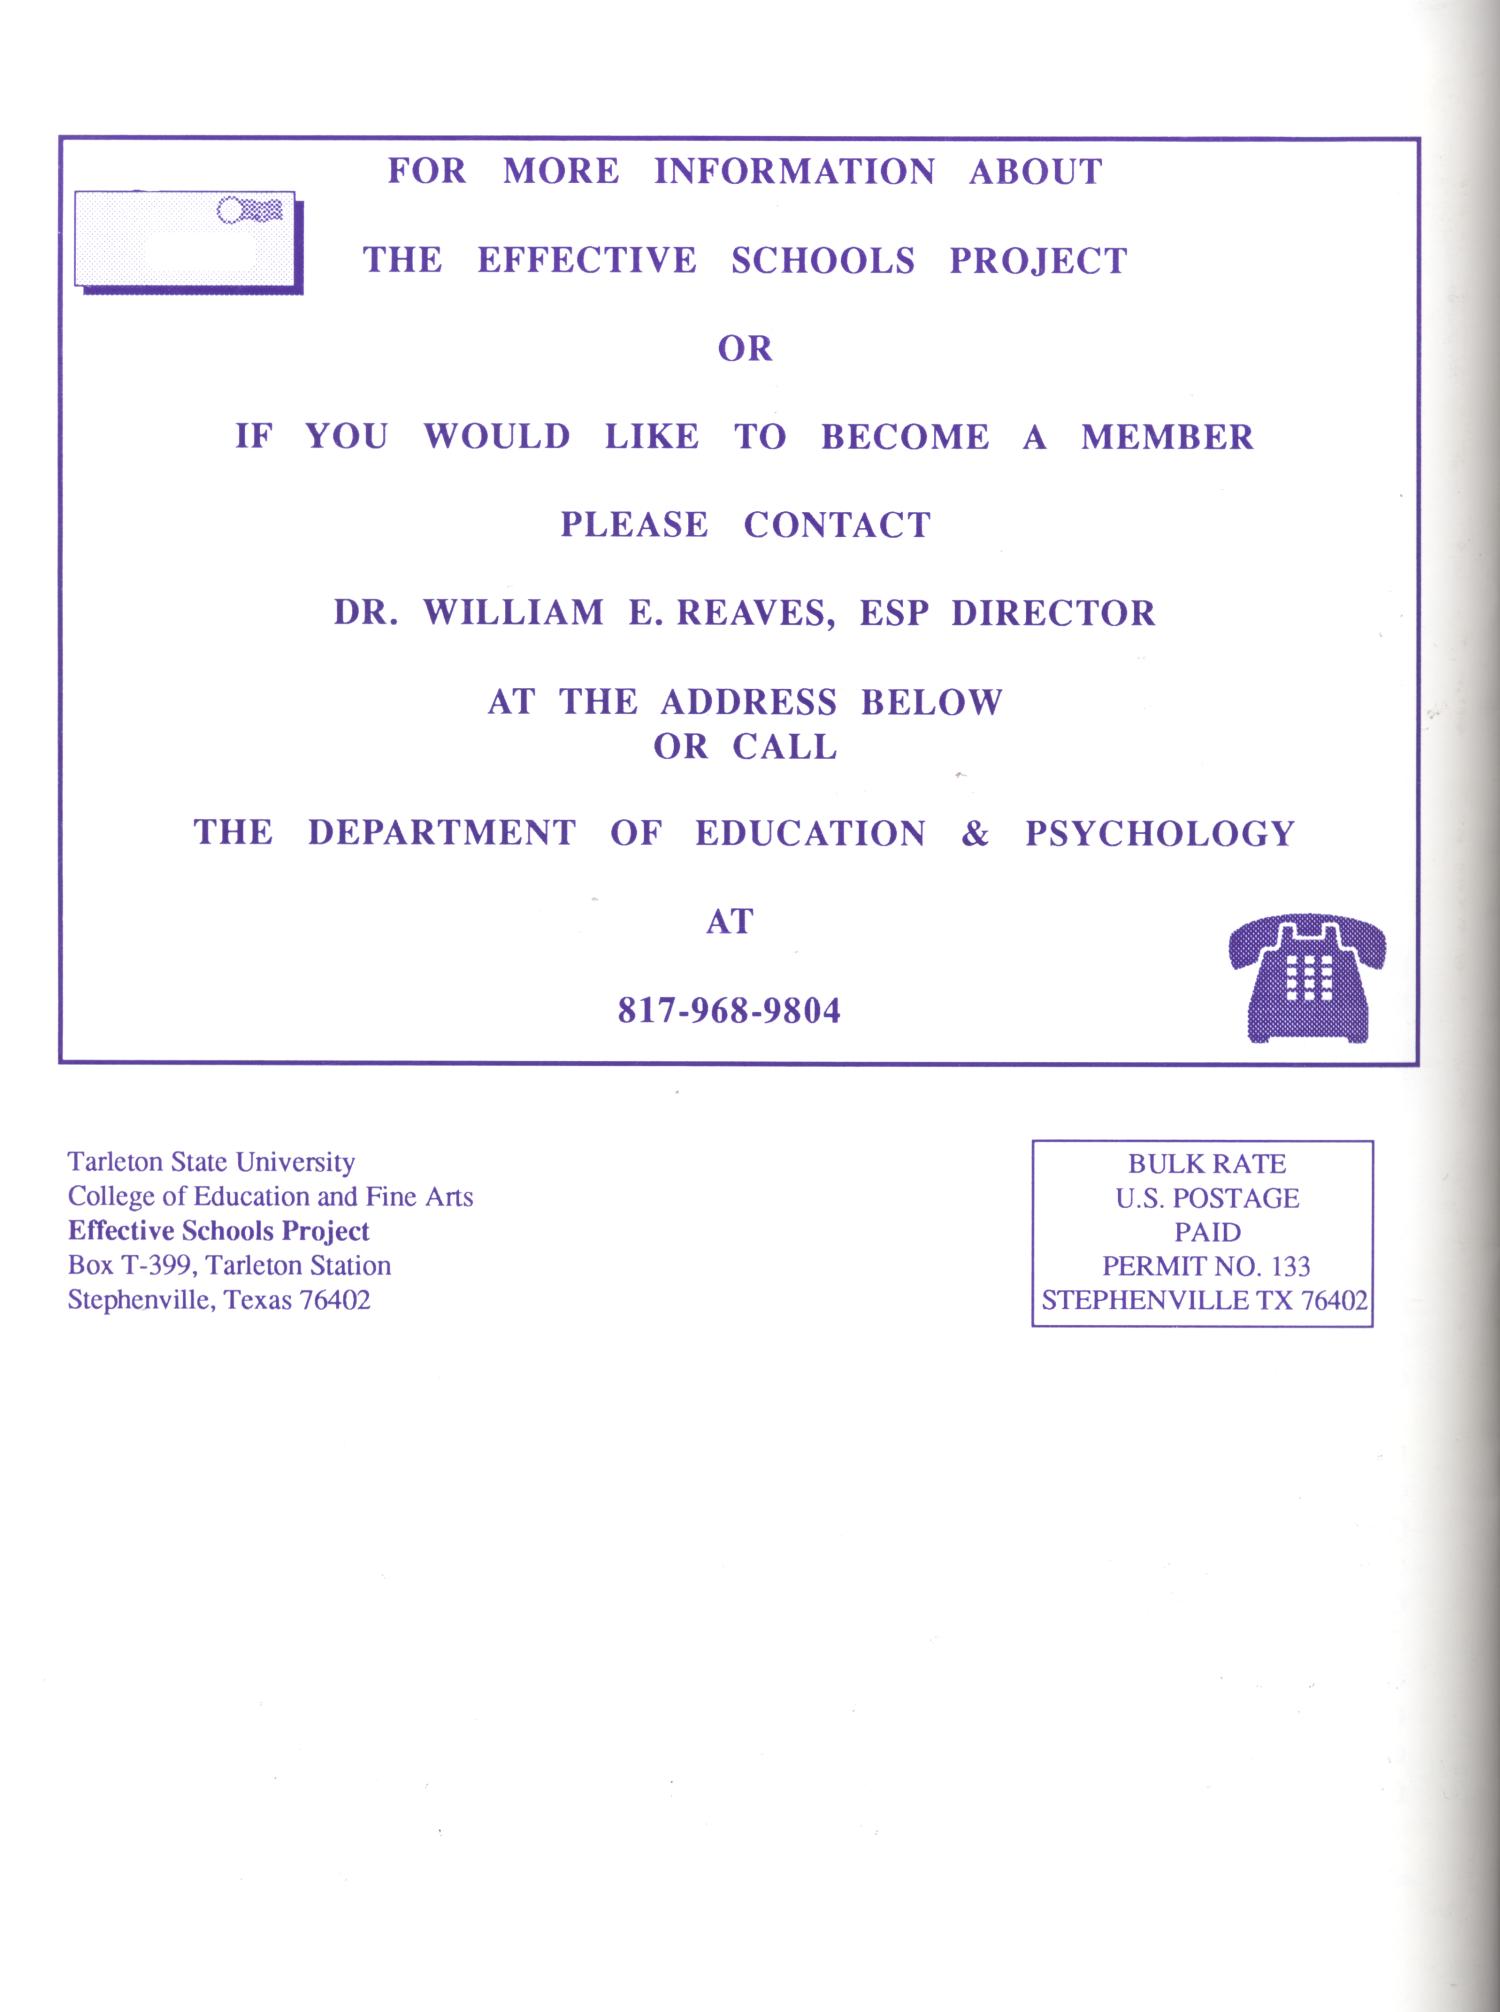 Journal of the Effective Schools Project, Volume 1, 1994
                                                
                                                    Back Cover
                                                